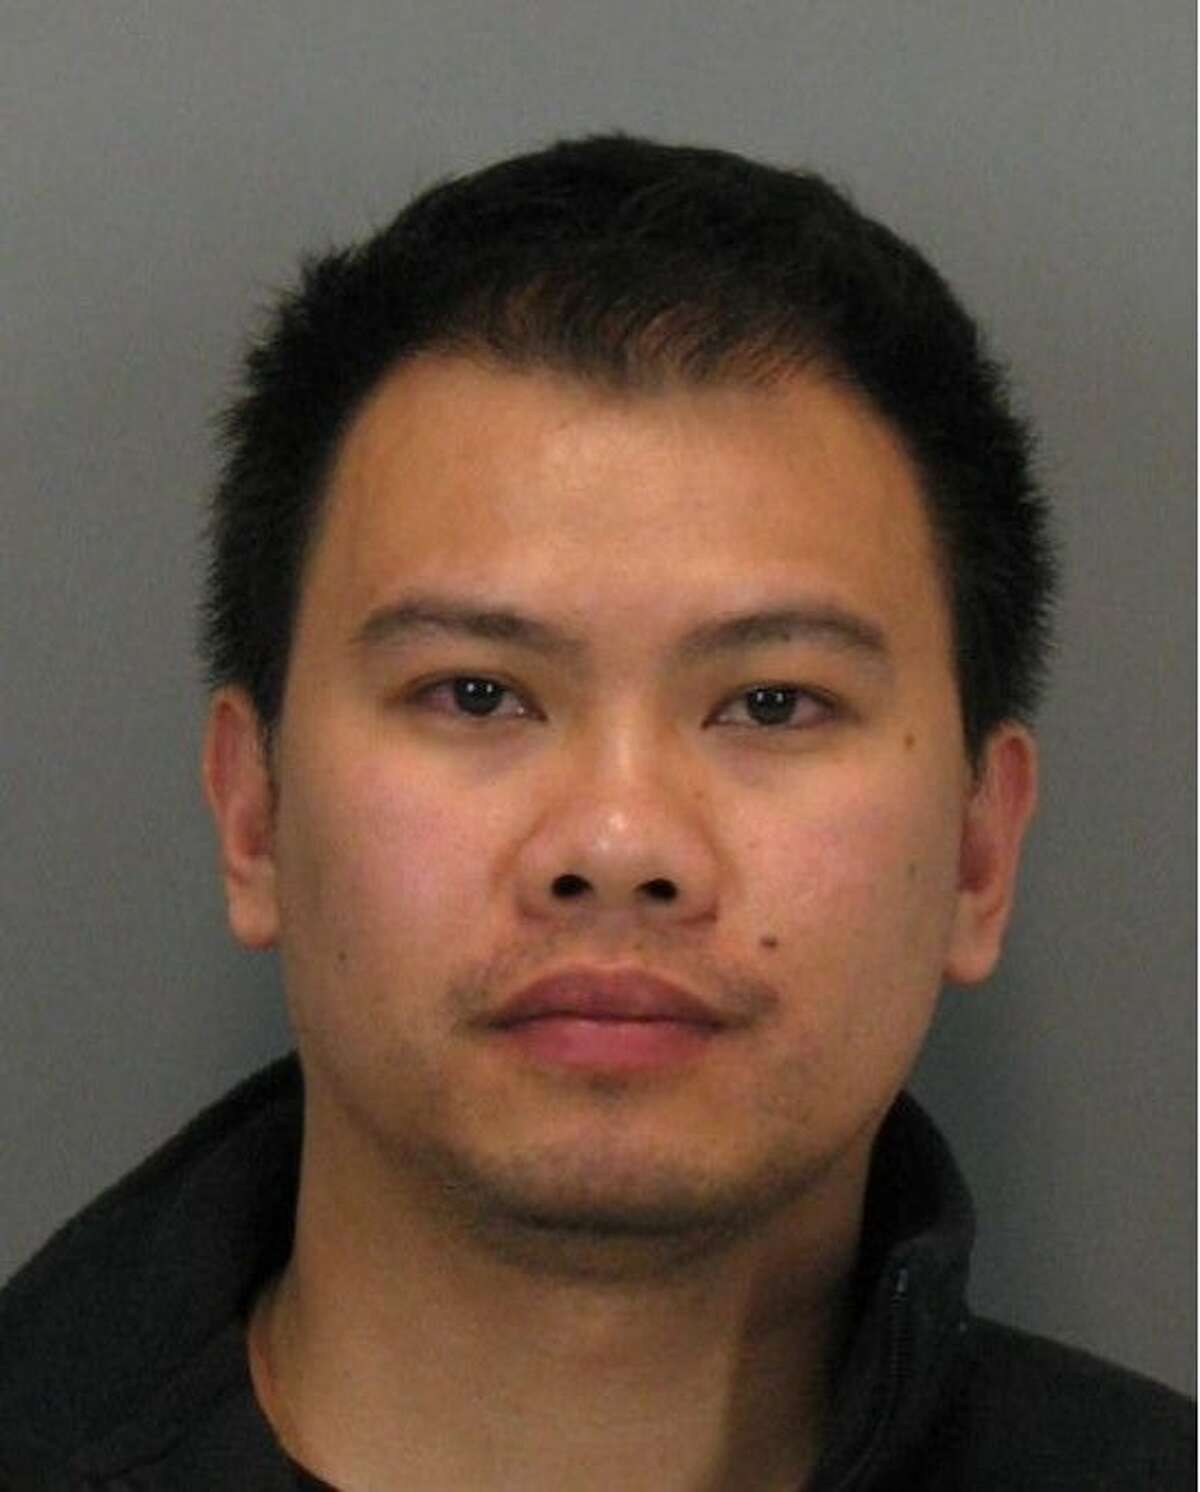 Pierre Ramos has been arrested and charged, along with four other people, in a $37 million computer-chip robbery in February 2011 at Unigen Inc. in Fremont.